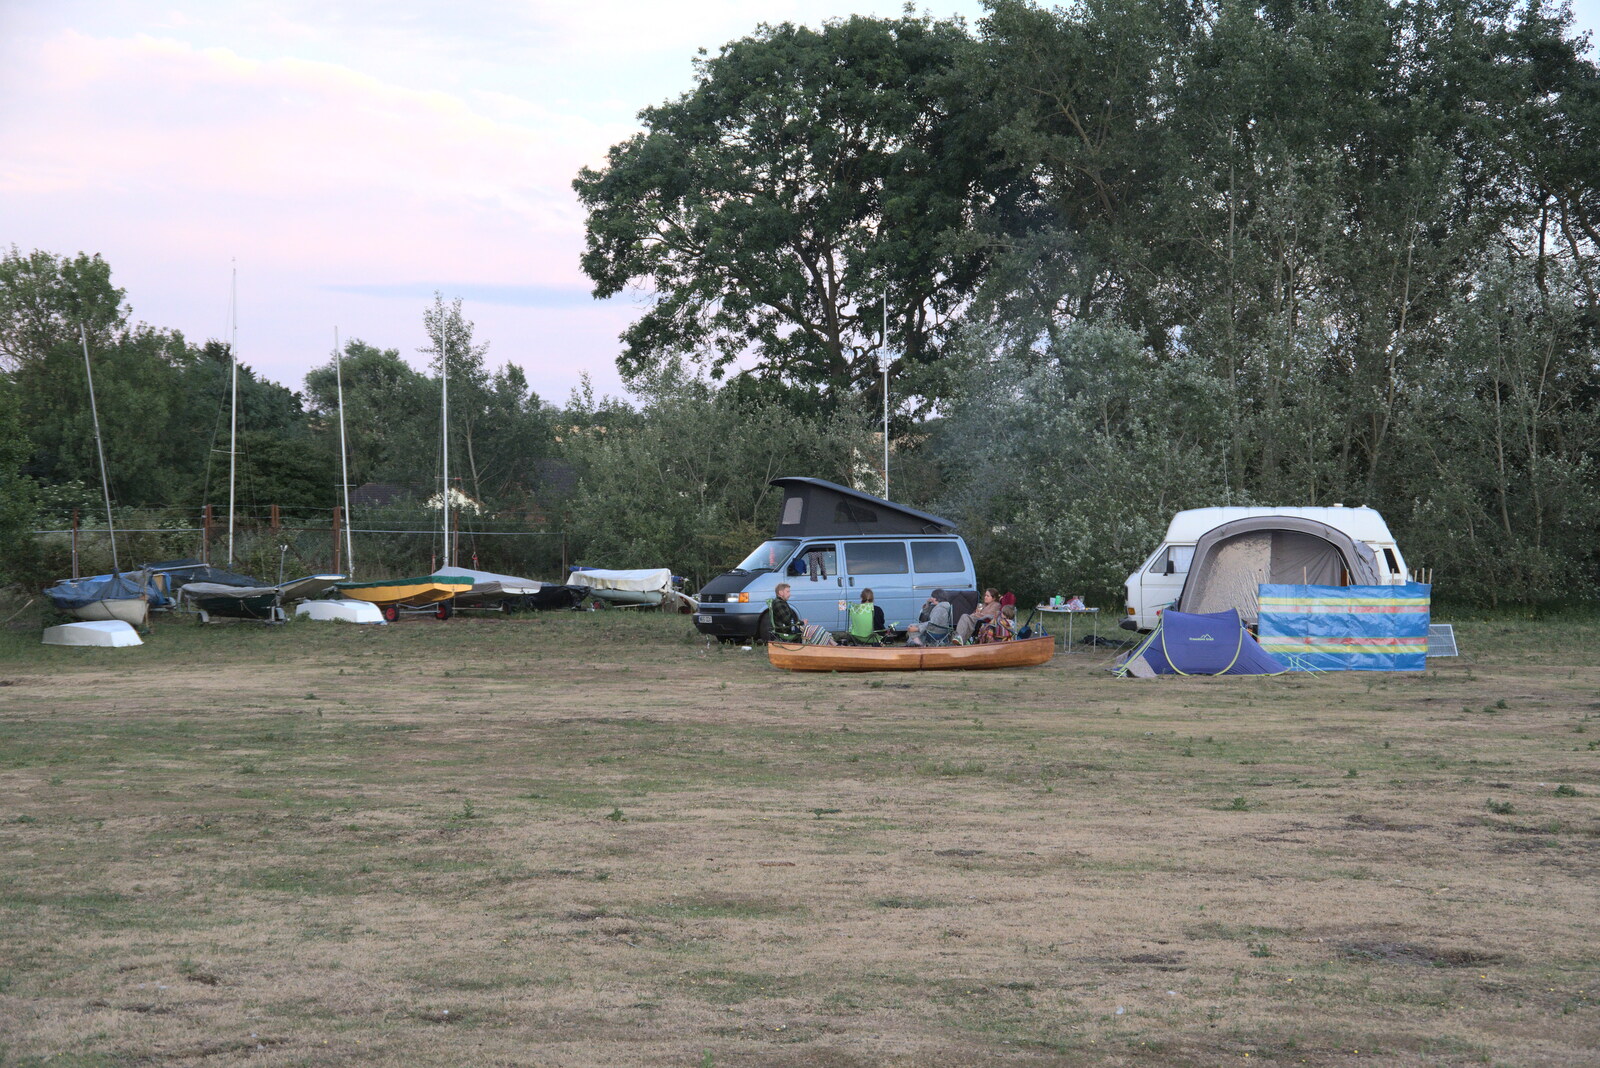 A campsite barbeque scene from Camping at the Lake, Weybread, Harleston - 25th June 2022